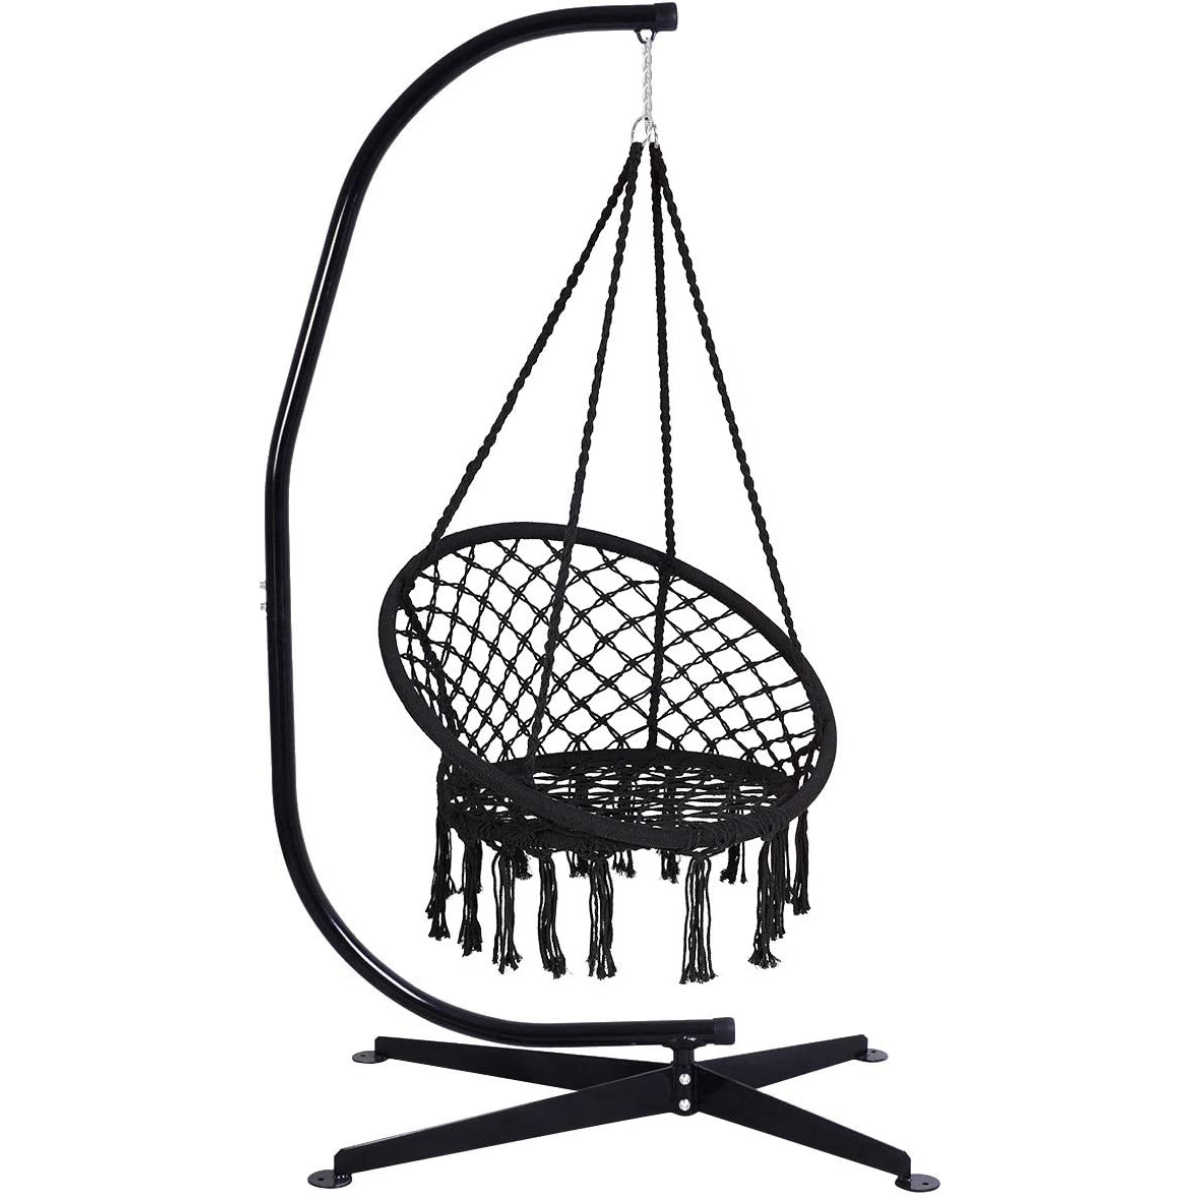 Hammock Swing Chair with Metal Rings (Stand not Included) Black